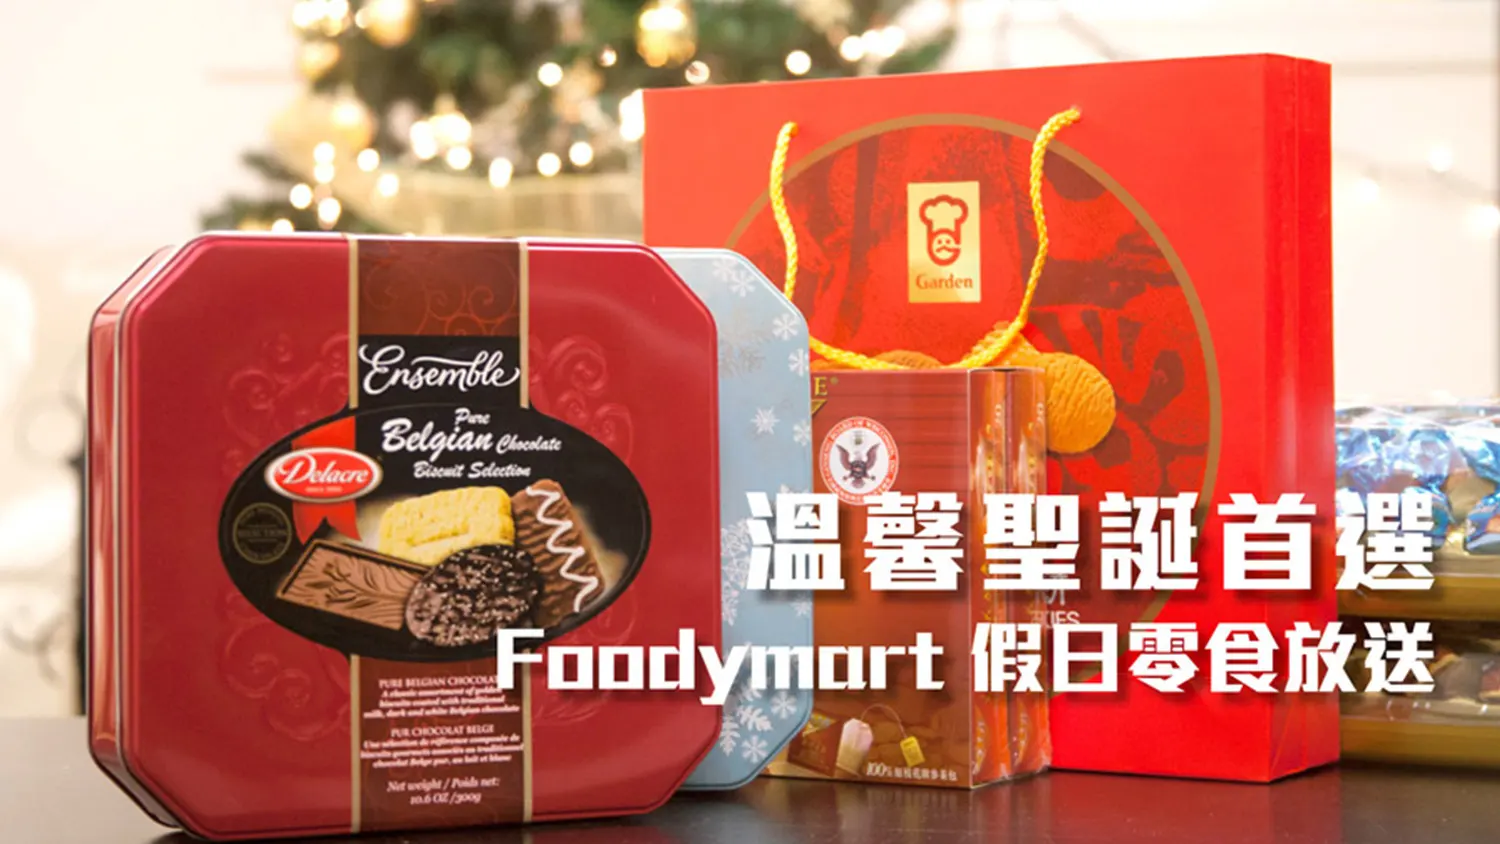 Video and photography project for Foody Mart 豐泰超市. Conducted product shootings for seasonal promotion